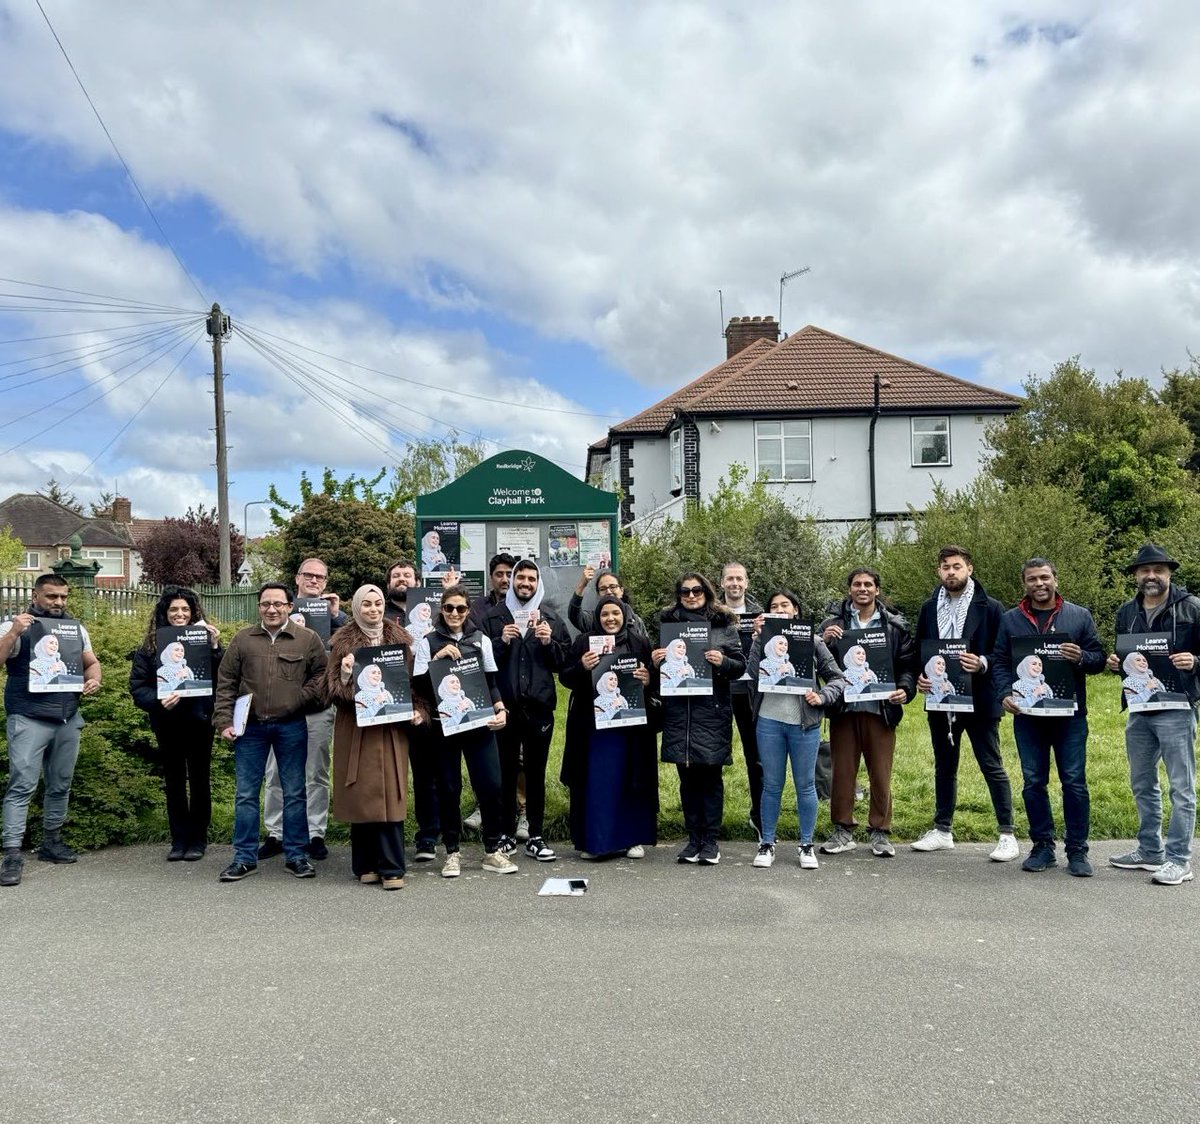 After a brilliant canvassing session, my volunteers and I reflect (over pizza!) on the conversations we have had on the doorstep. My neighbours in Ilford North are fed up with politics that remains distant, unresponsive and beholden to special interests. We are building a…